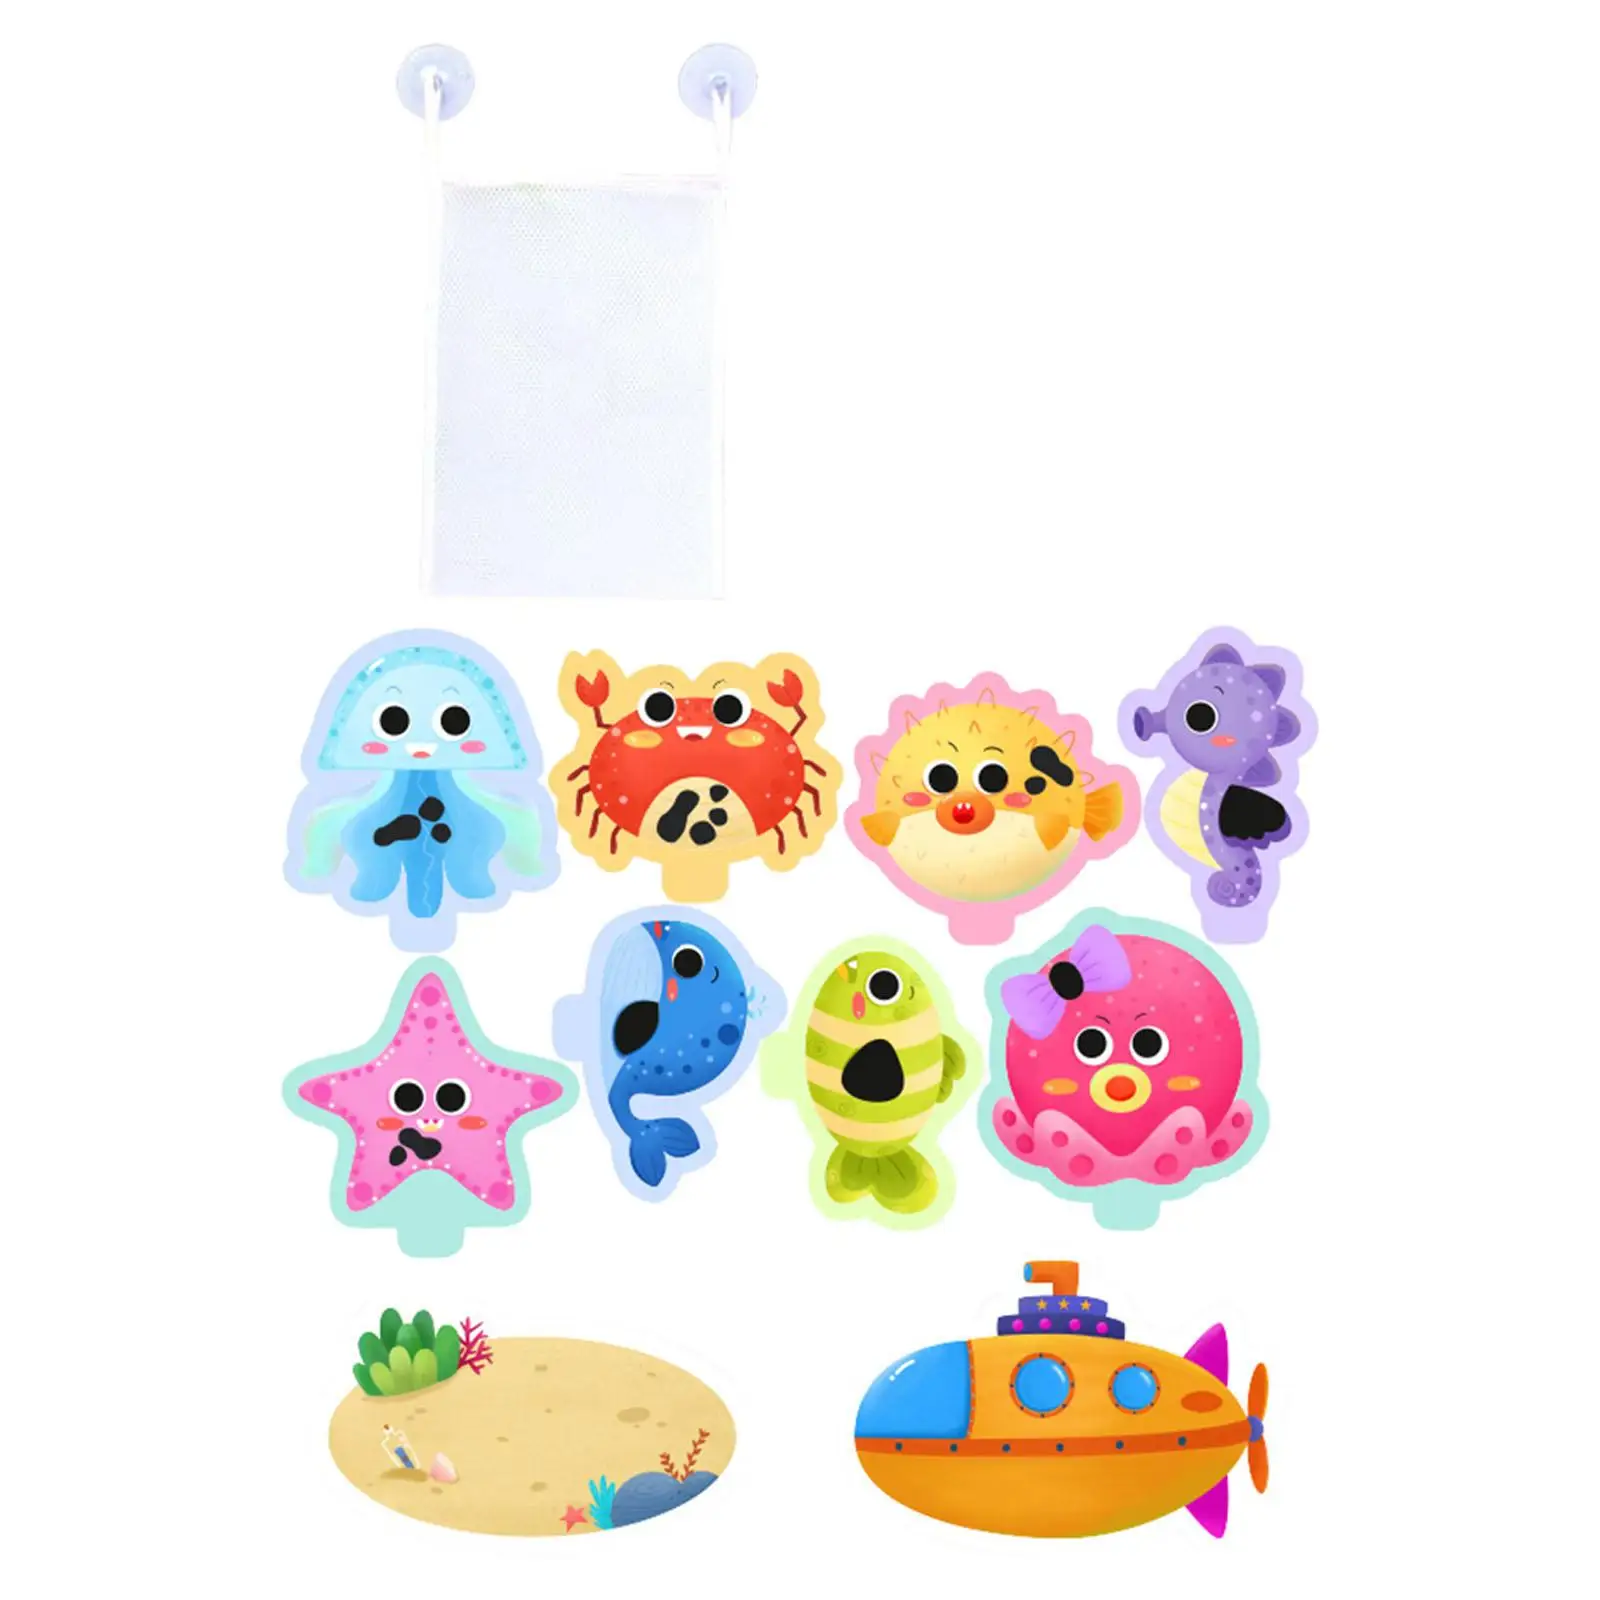 10Pcs Child Early Educational Wall Stickers with Storage Bag Preschool Game Bathroom Stickers for Toddler Children Girls Boys